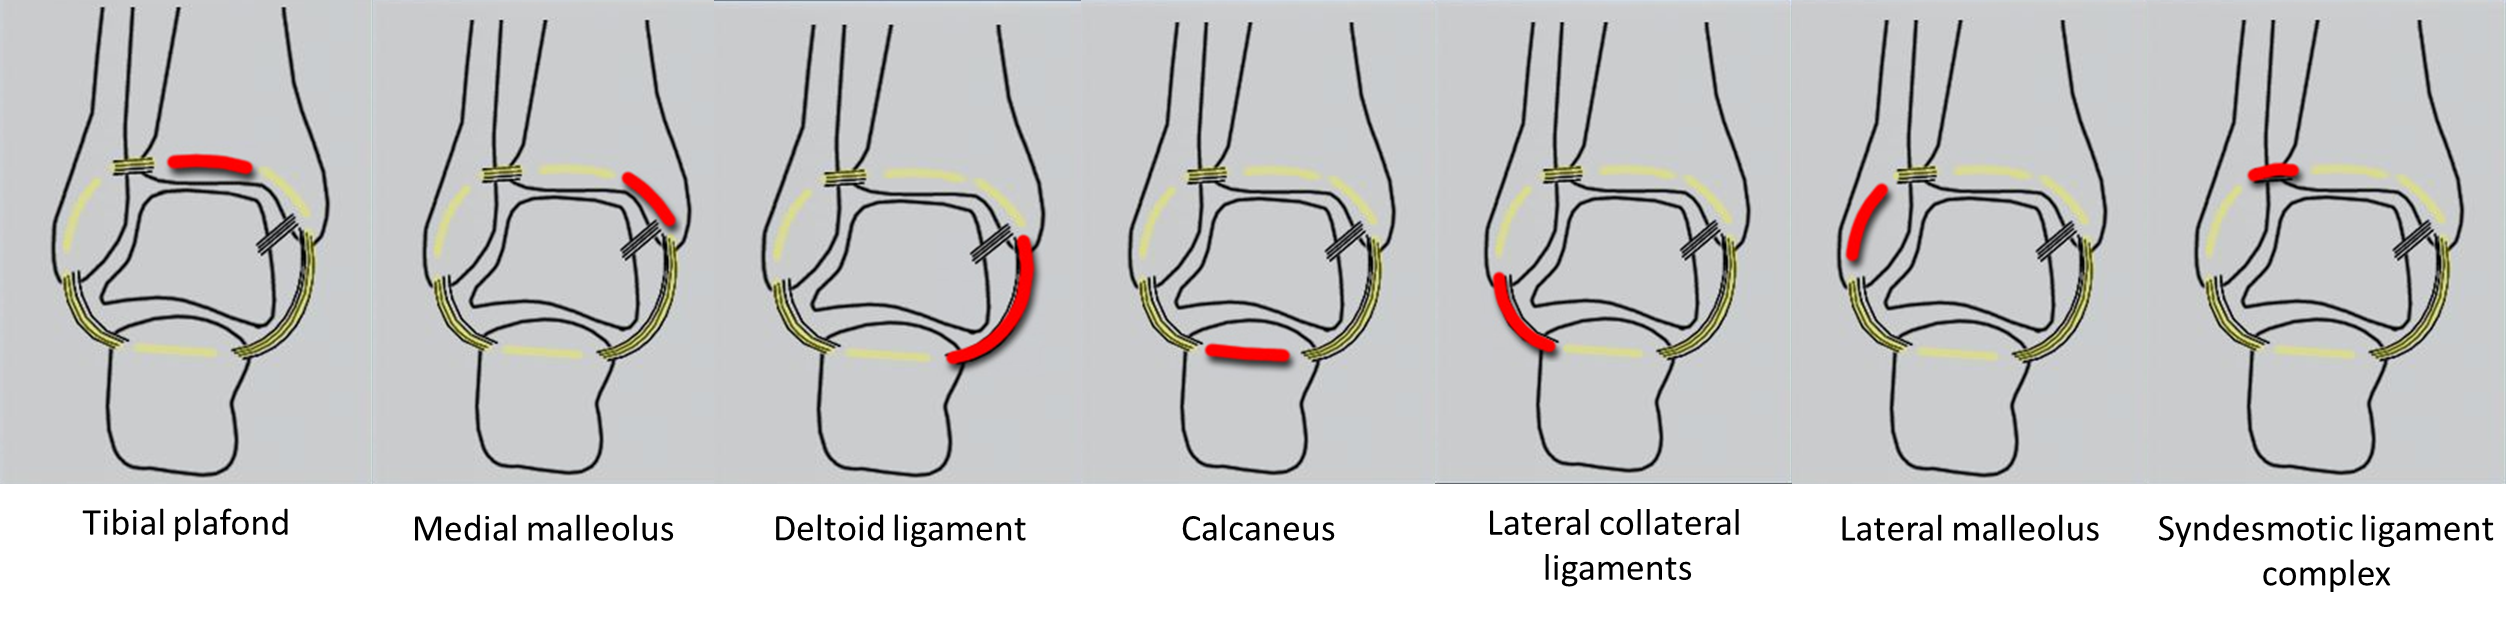 https://elentra.healthsci.queensu.ca/assets/modules/ts-ankle-radiograph/Picture12.png